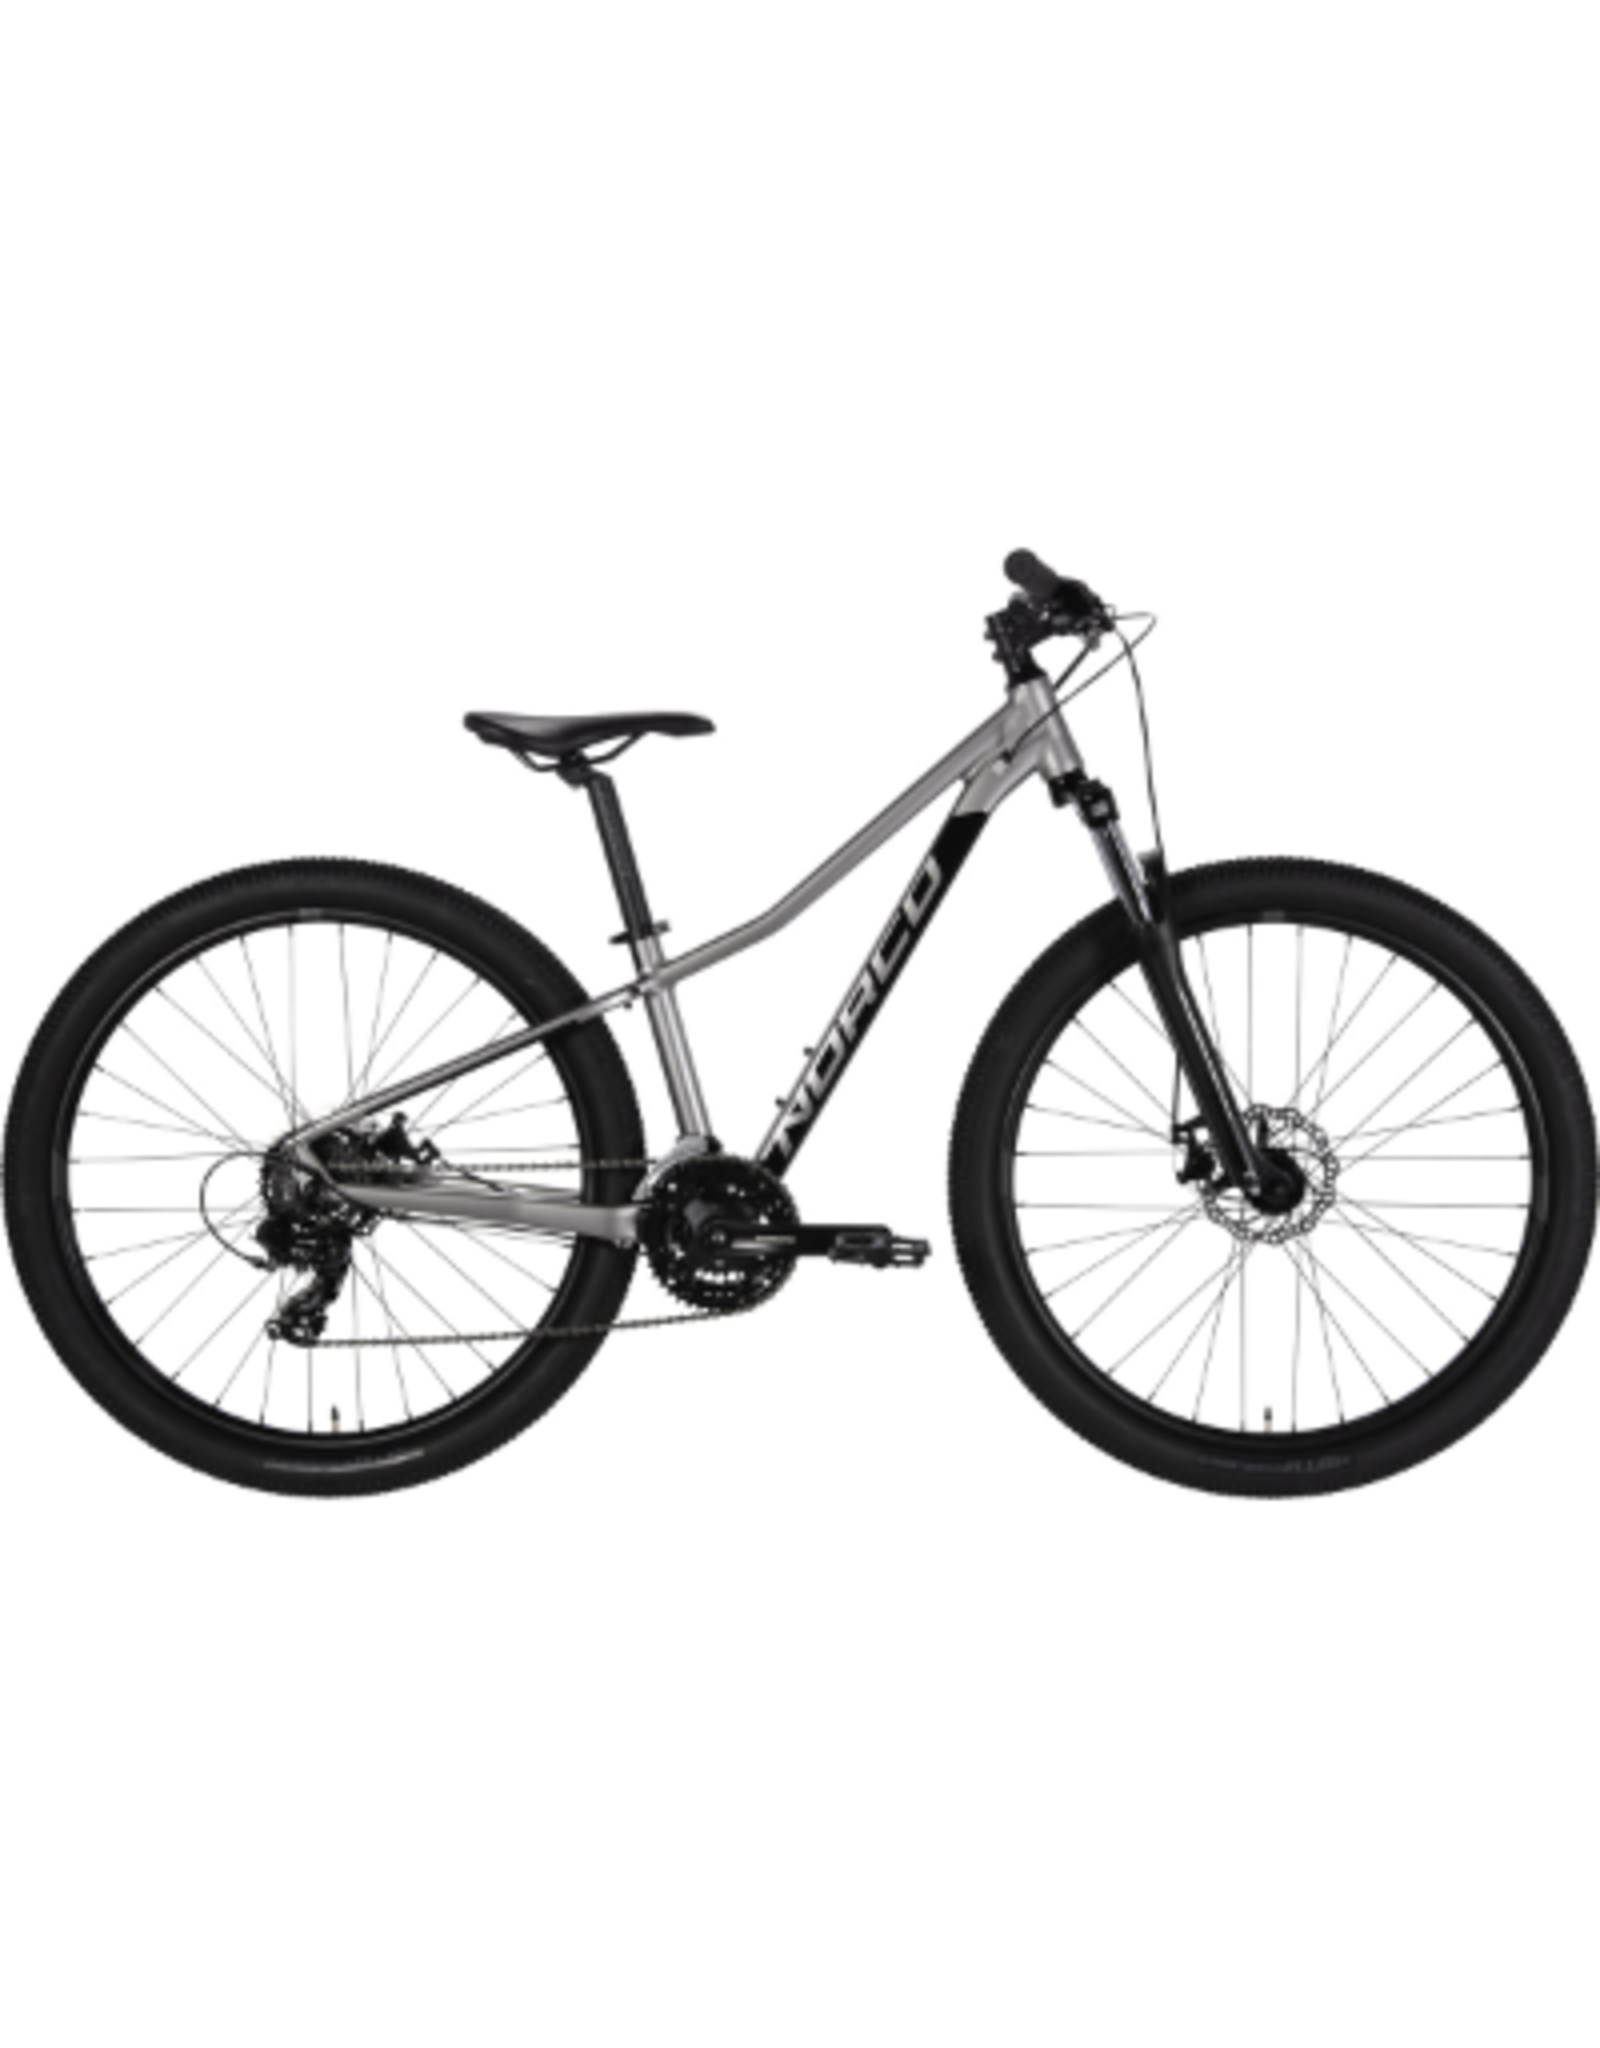 NORCO NORCO 23 STORM 5 (27)